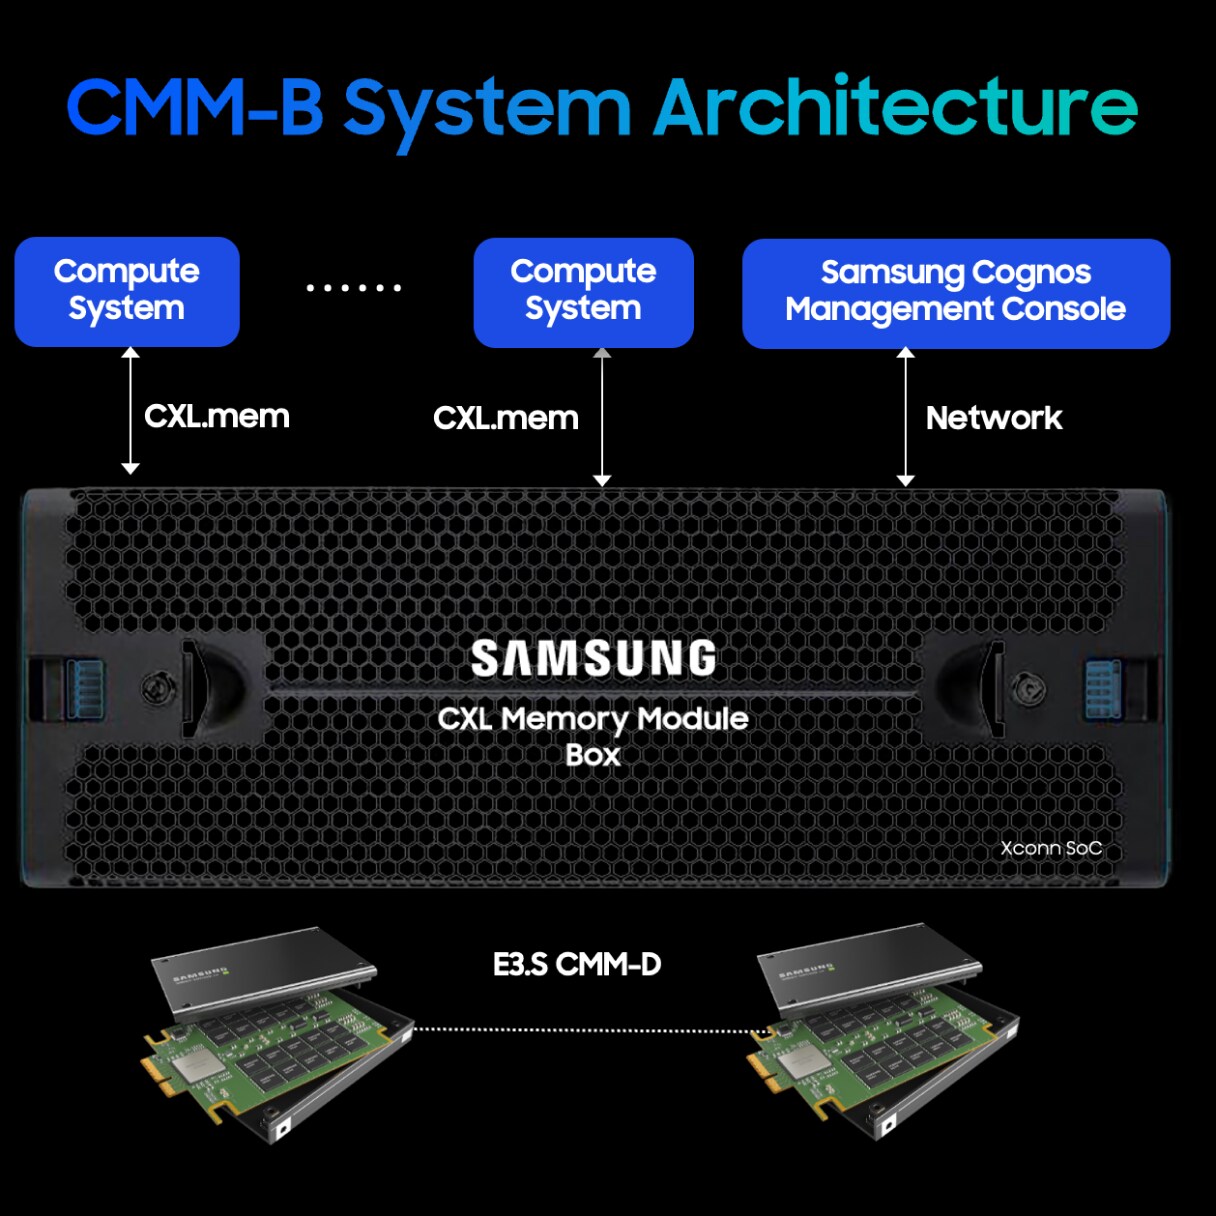 a diagram of Samsung's CMM-B System Architecture, illustrating a memory module box connected to compute systems and a management console via CXL.mem network.